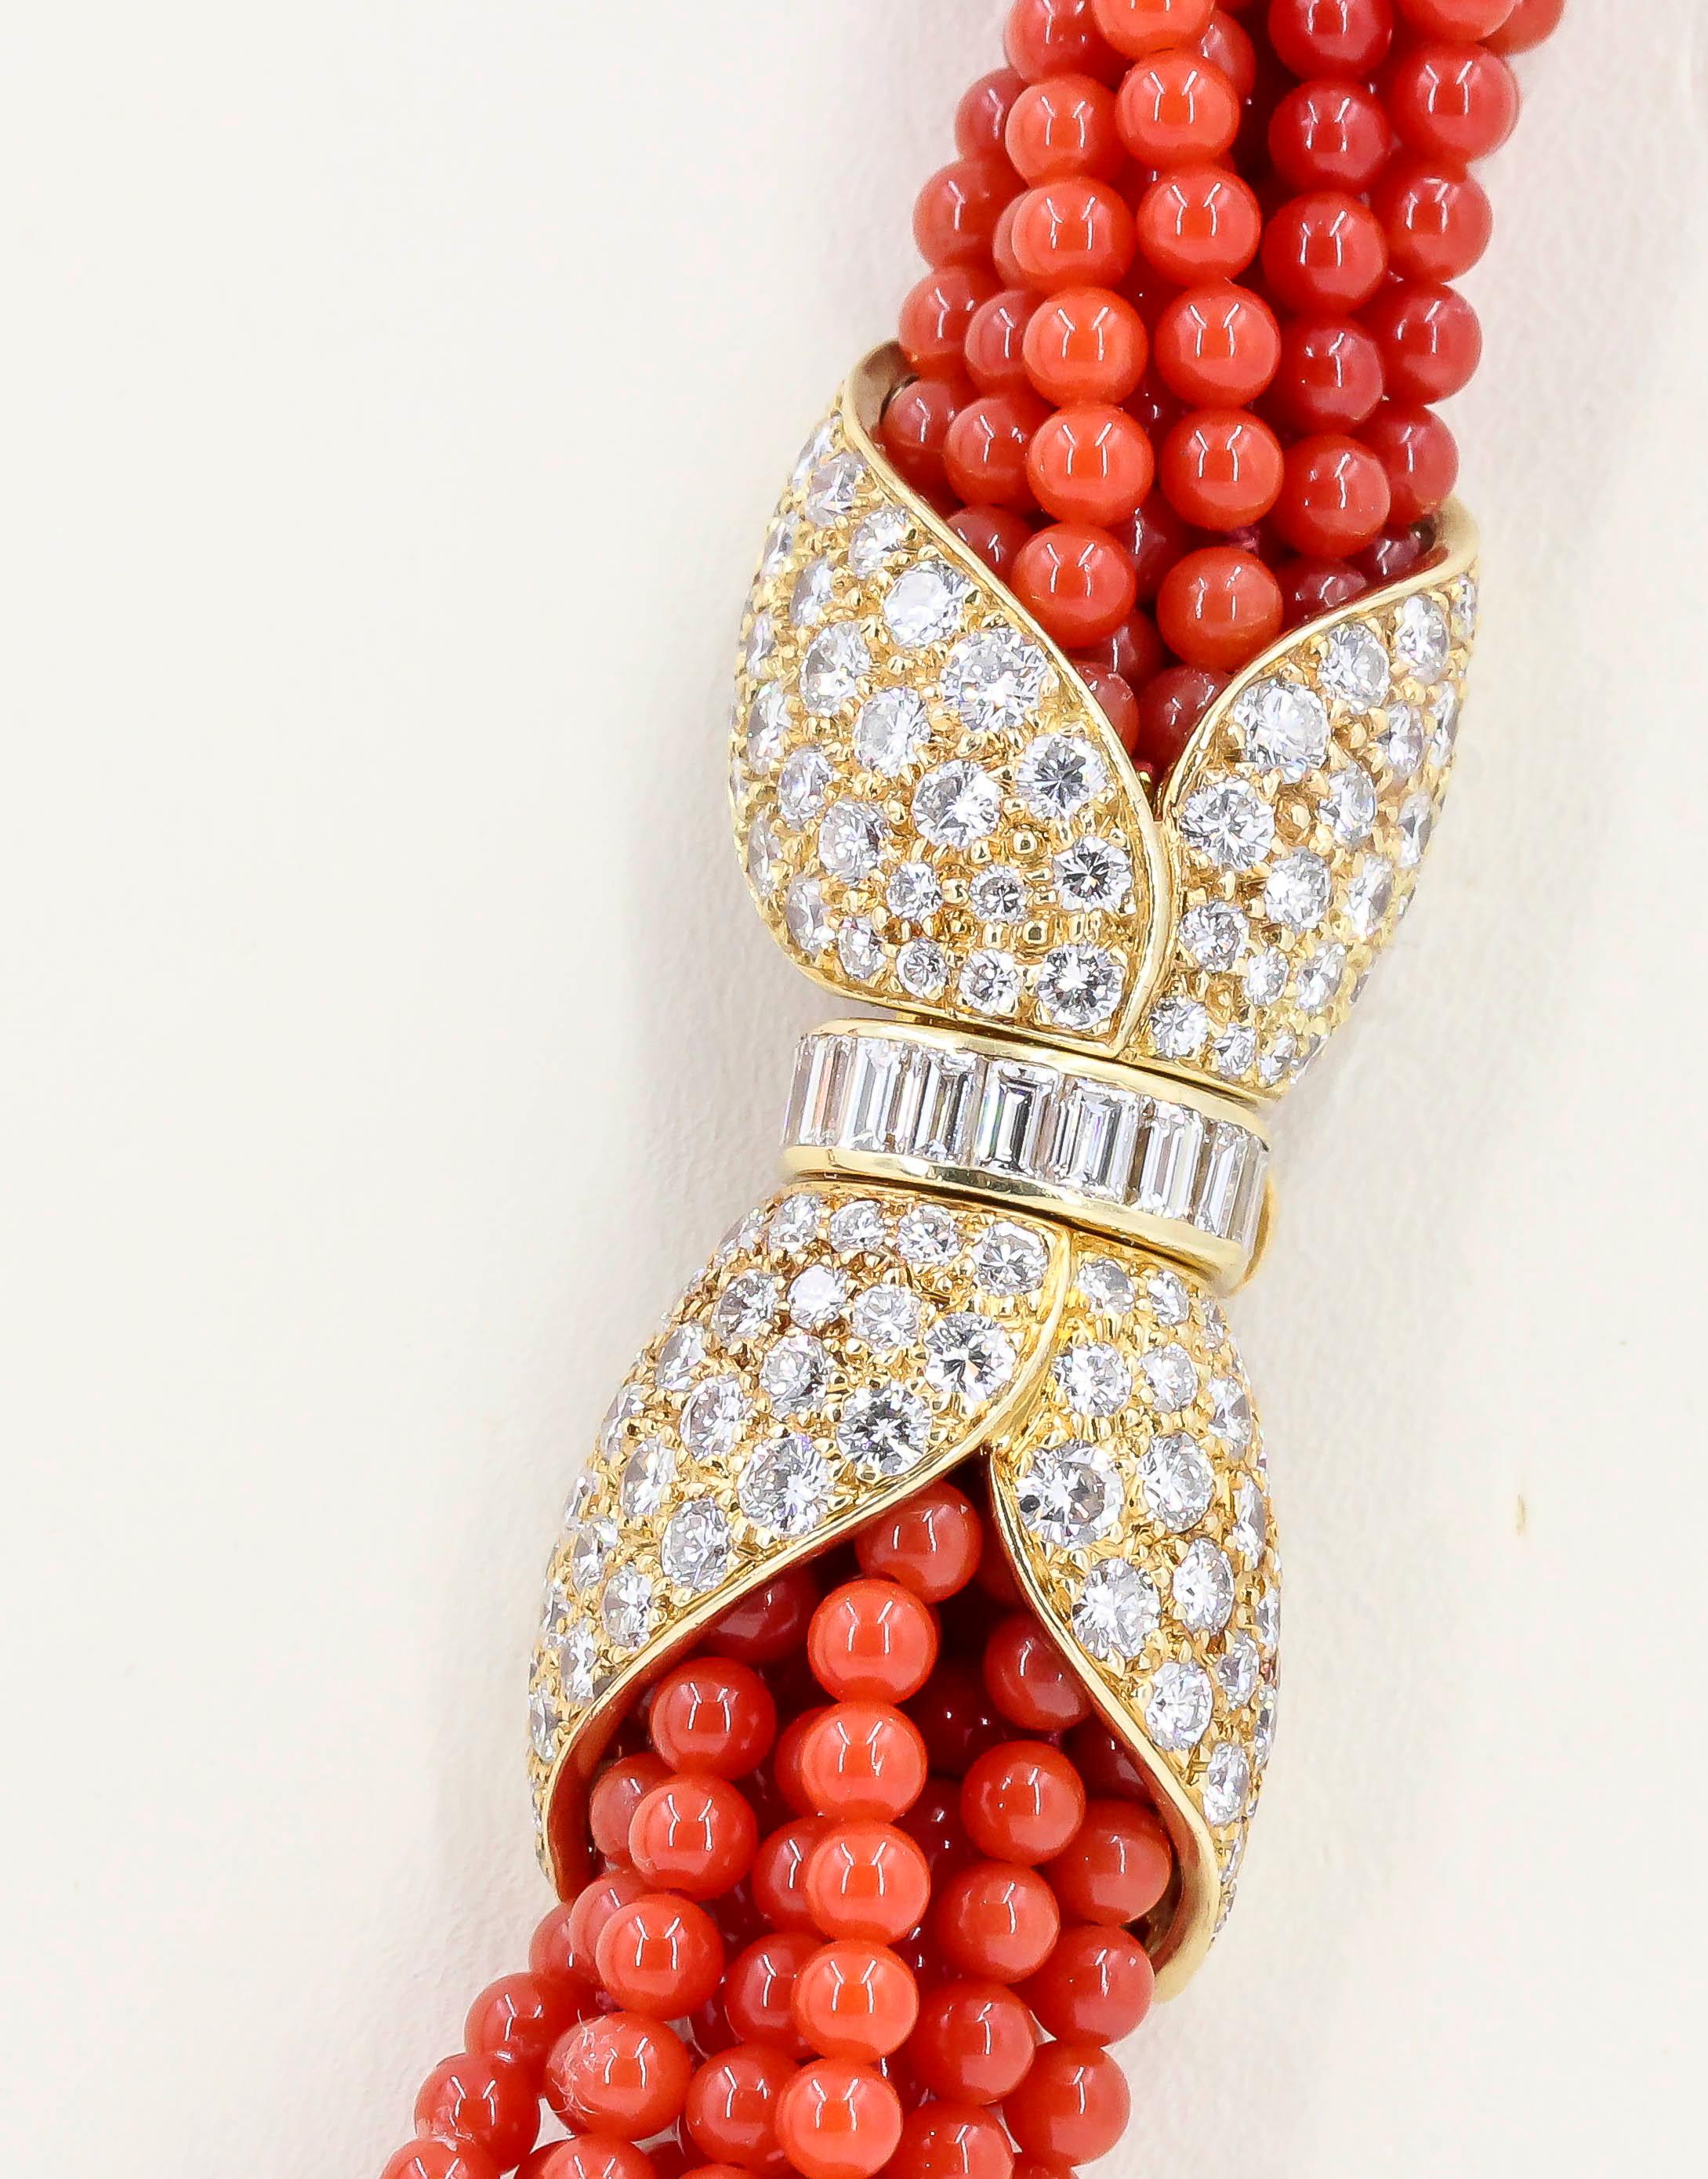 Chic diamond, coral and 18K yellow gold torsade necklace and bracelet combination by Van Cleef & Arpels, circa 1970-80s. It features 8 strands of rich red coral beads, held on by two clasps (each of which completes the necklace and the bracelet, or